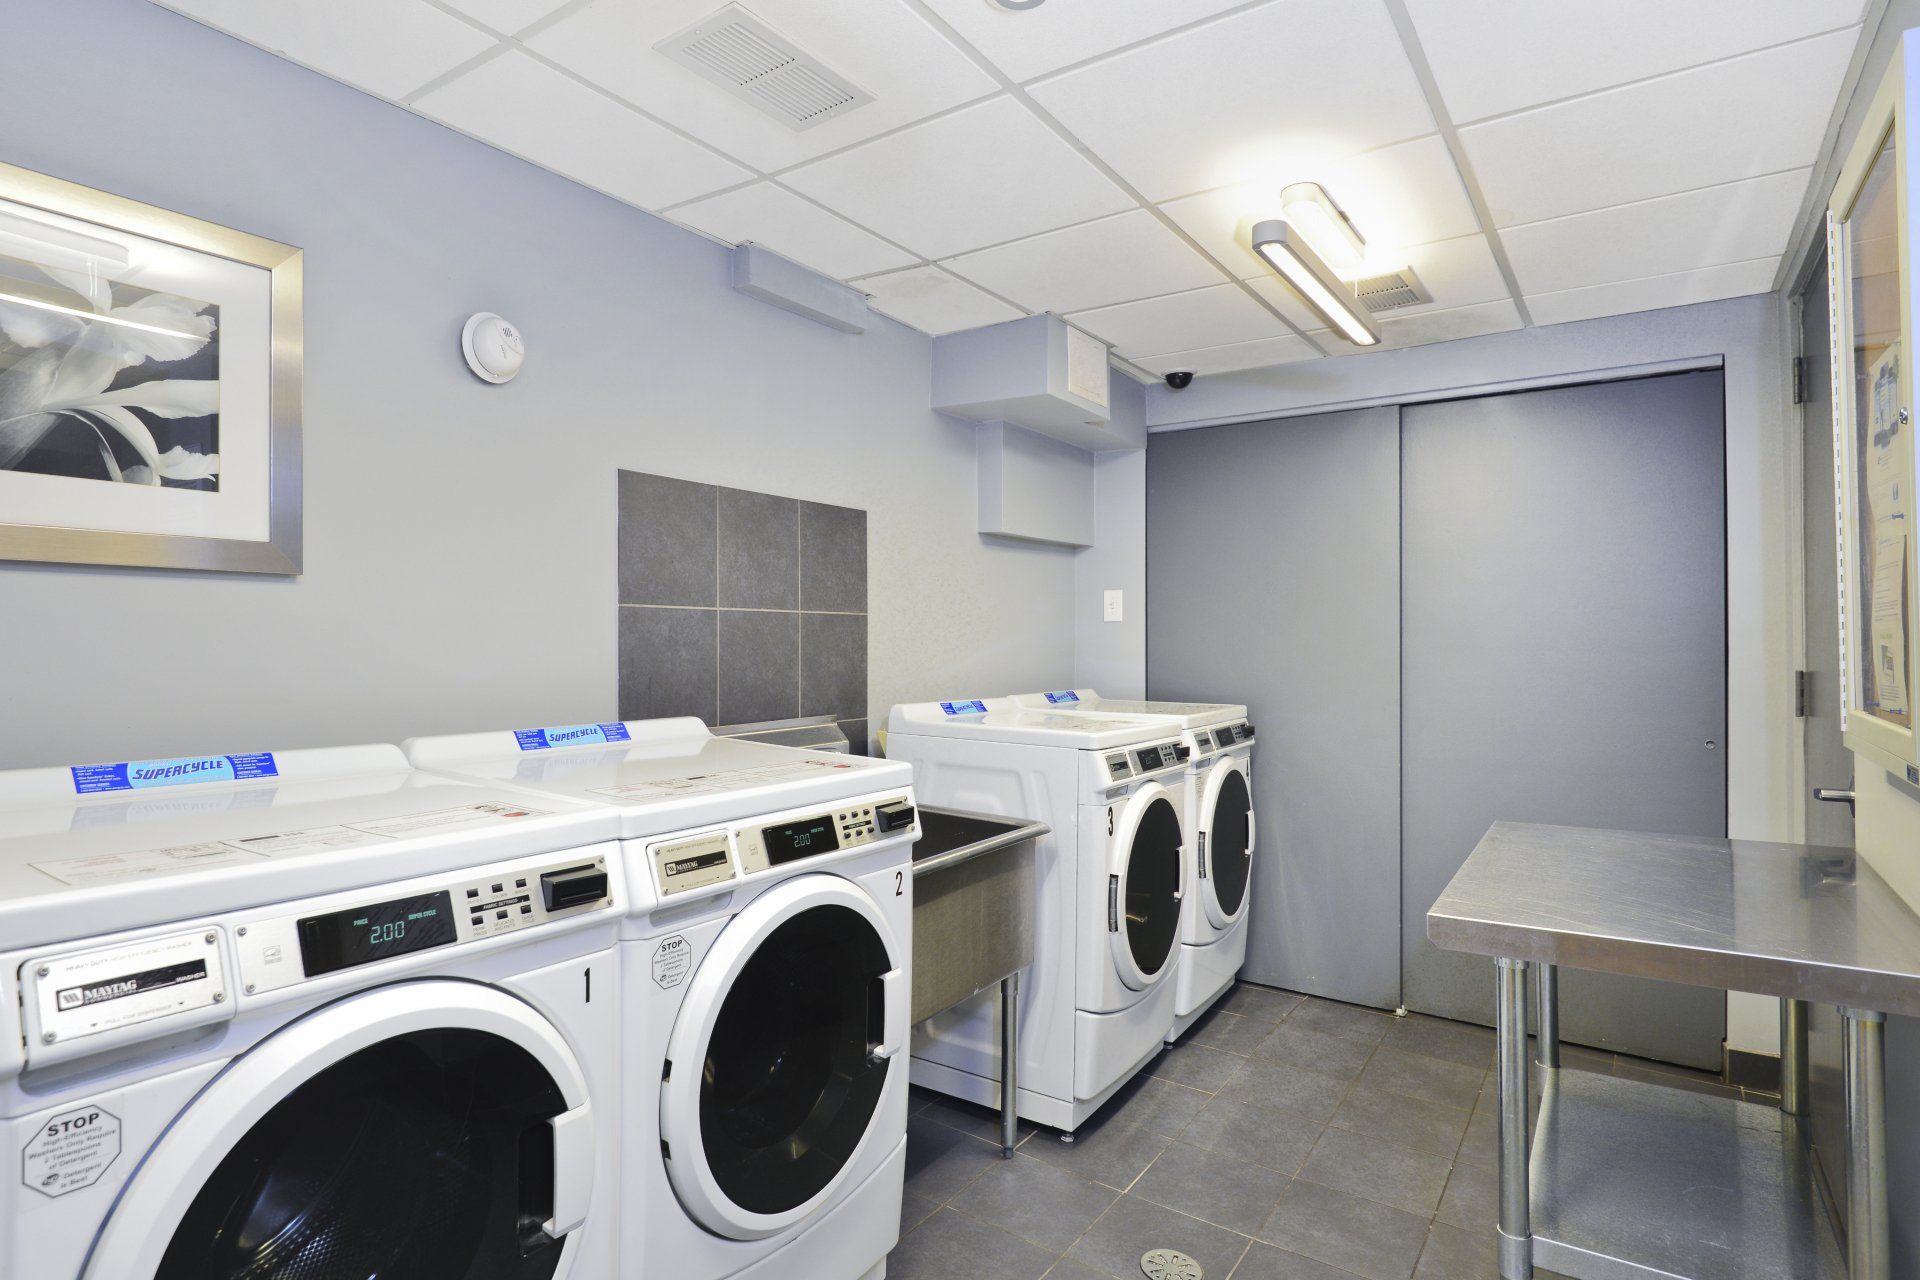 A laundry room with washers and dryers and a sink at Reside on Roscoe.